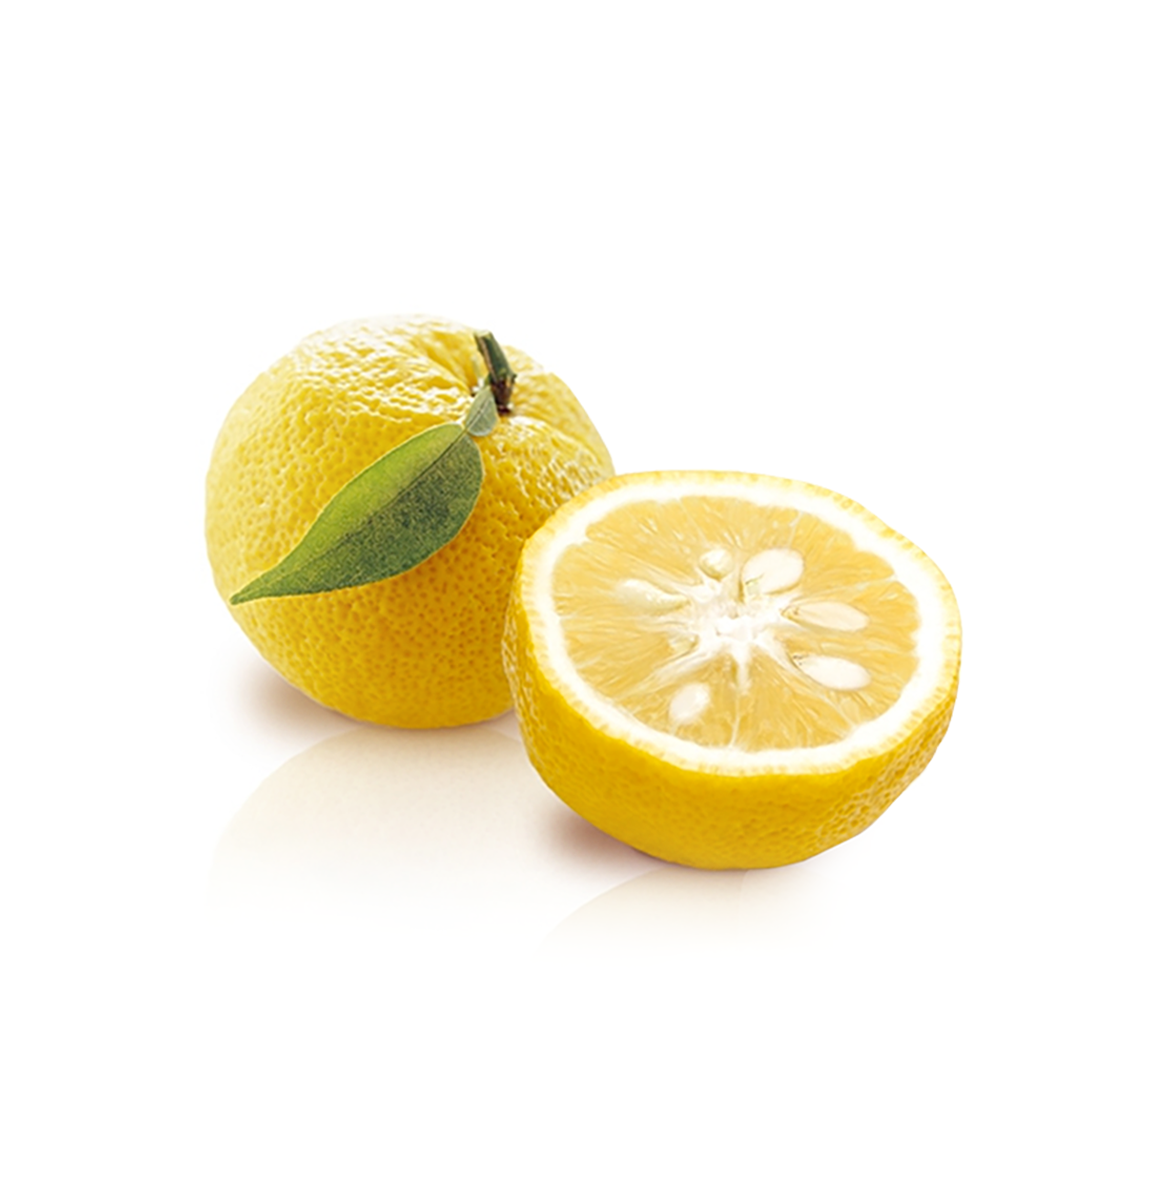 What is Yuzu? All About the Citrus Fruit